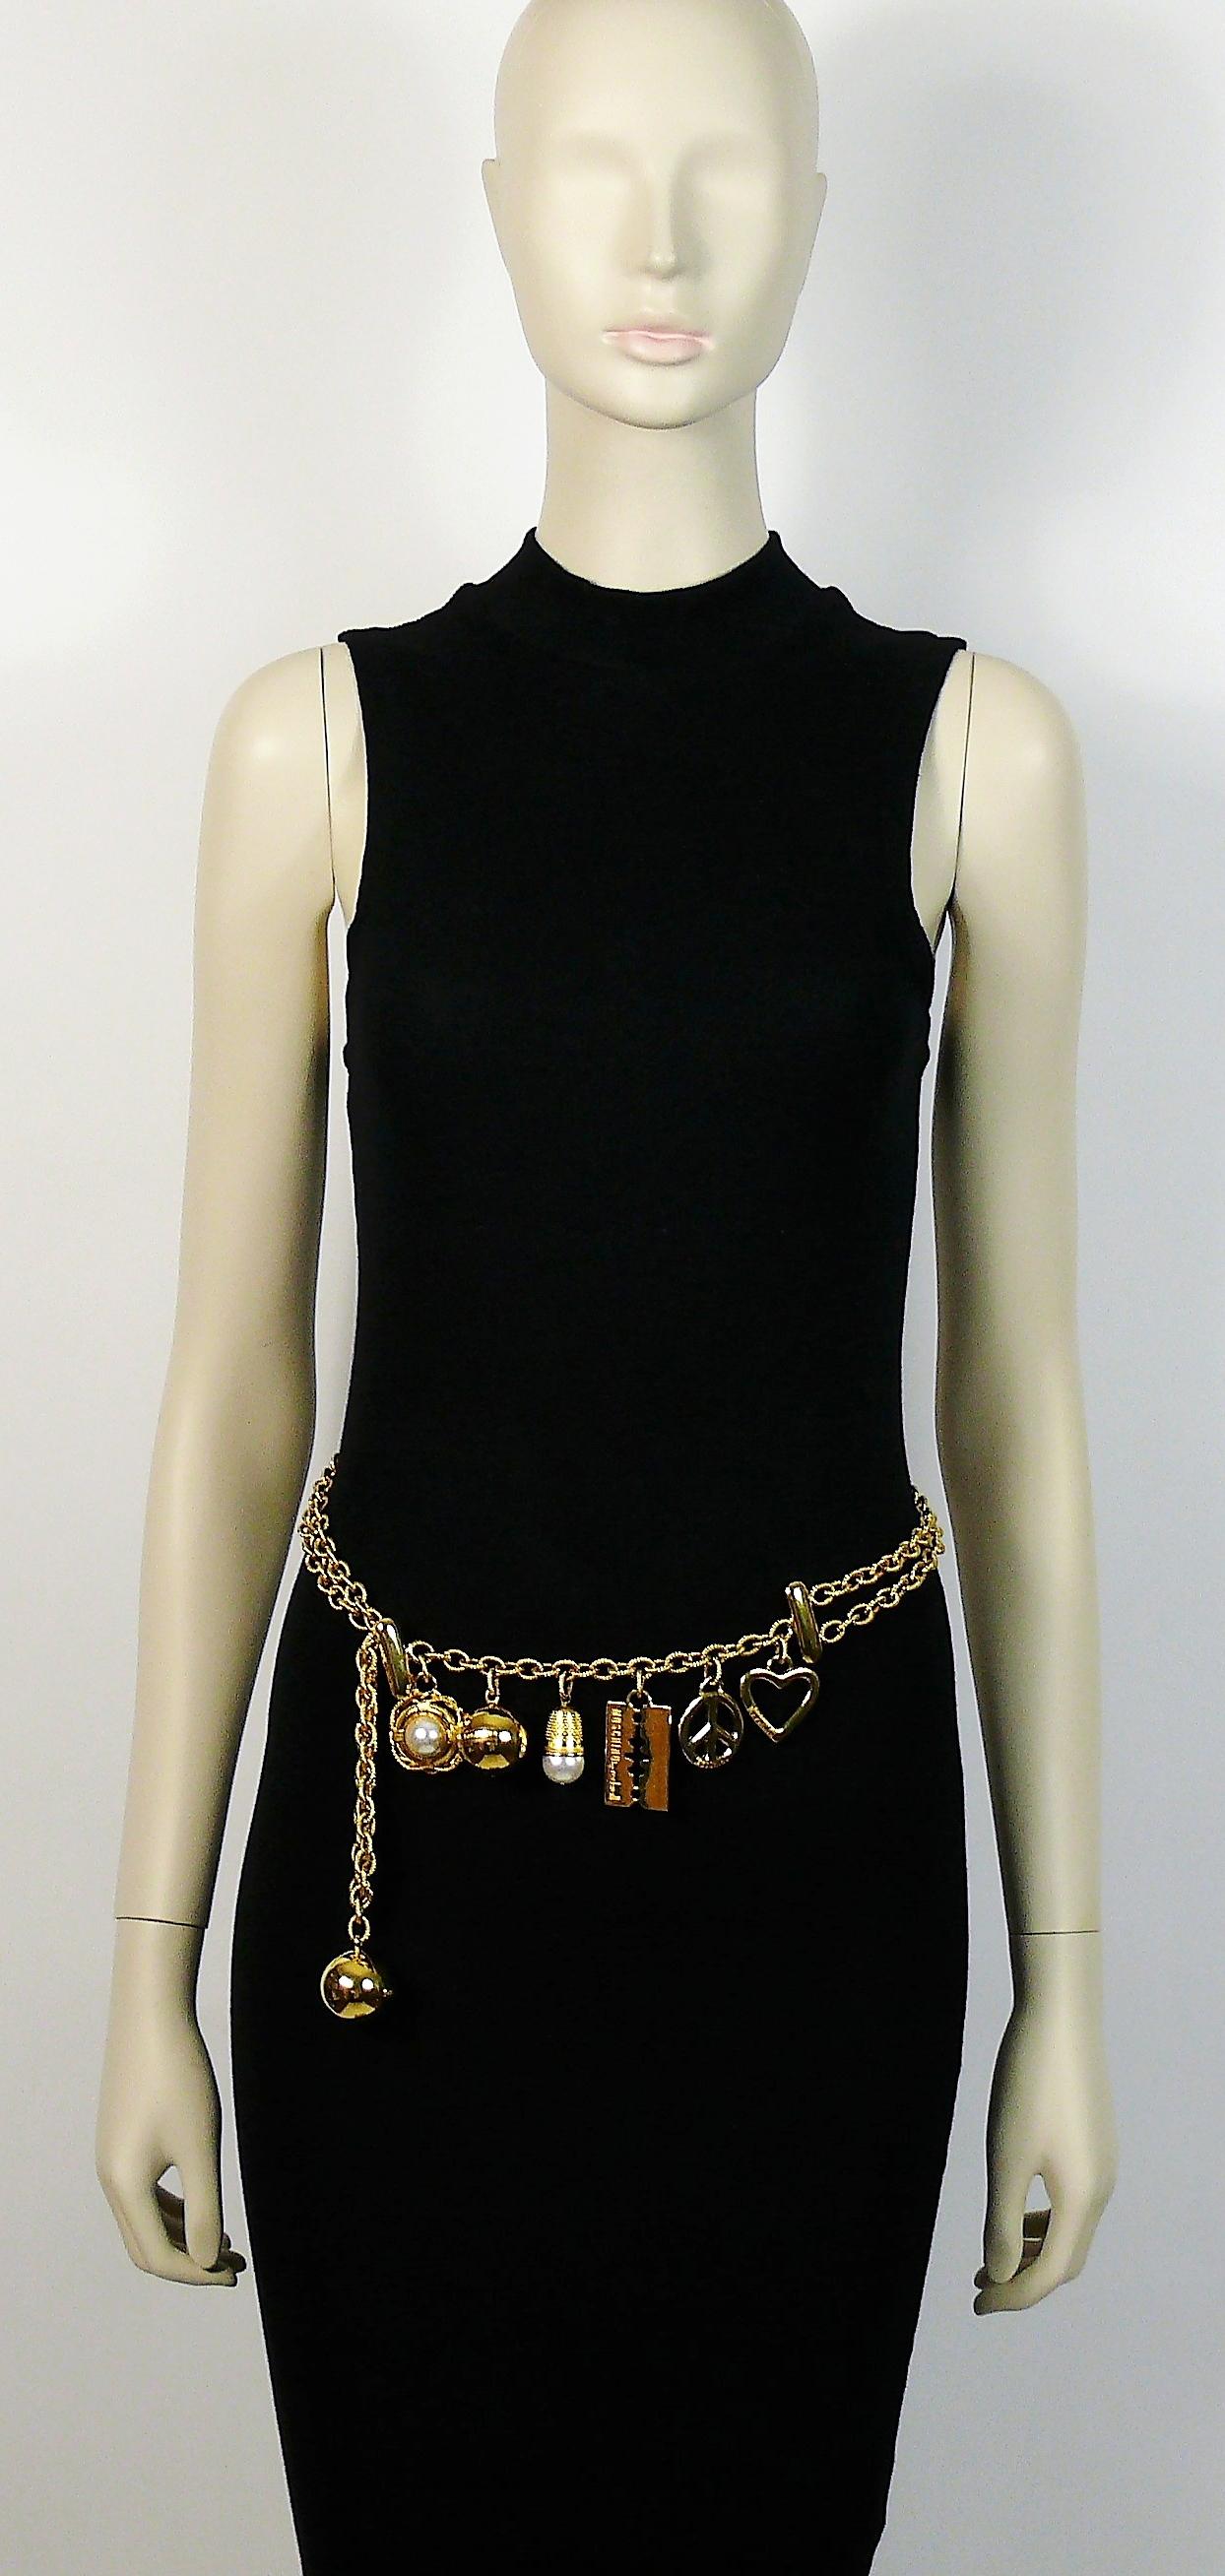 MOSCHINO by REDWALL vintage iconic gold toned belt/necklace featuring charms : golden balls, heart, peace sign, razor blade, thimble and ring buoy embellished with faux pearl.

Two tiered chunky textured chain.
Hook clasp.

Could be used as a